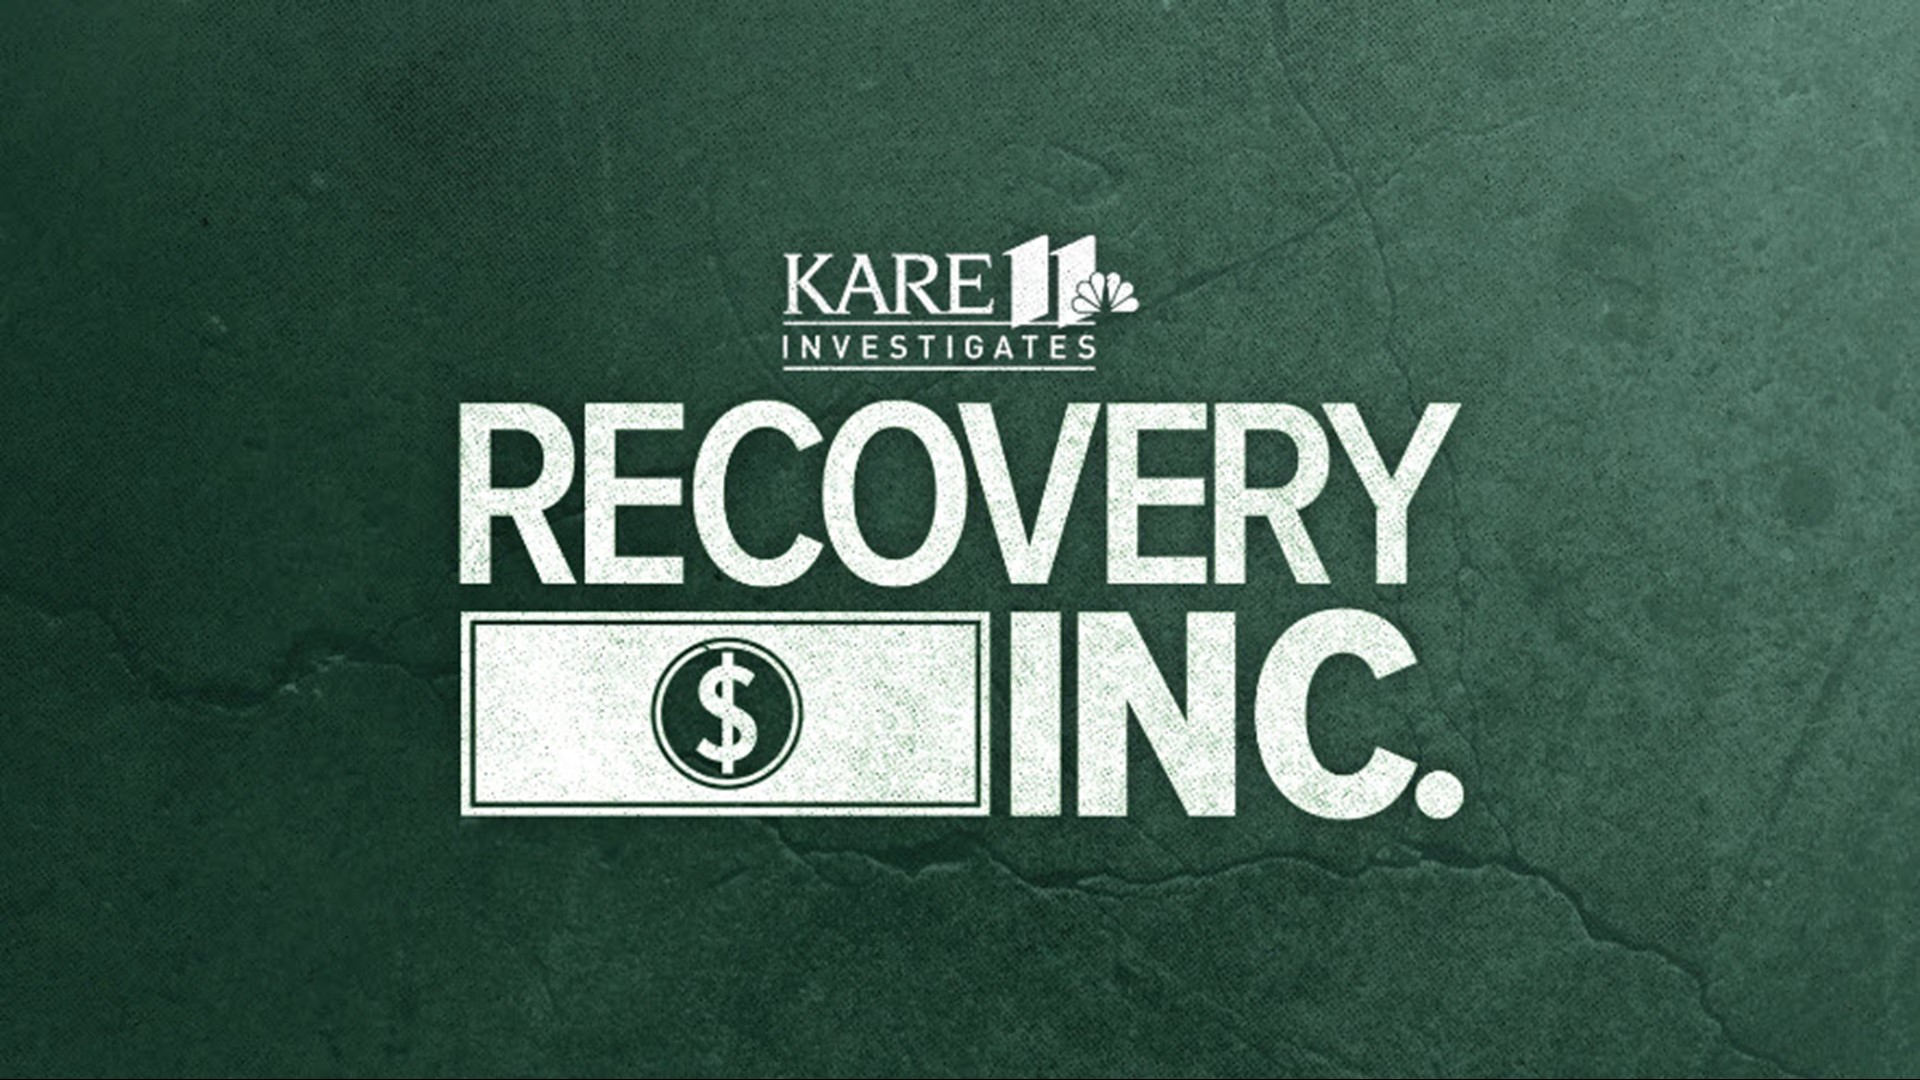 After KARE 11 exposed allegations that taxpayers were overbilled for addiction recovery services, Minnesota lawmakers introduce new limits.